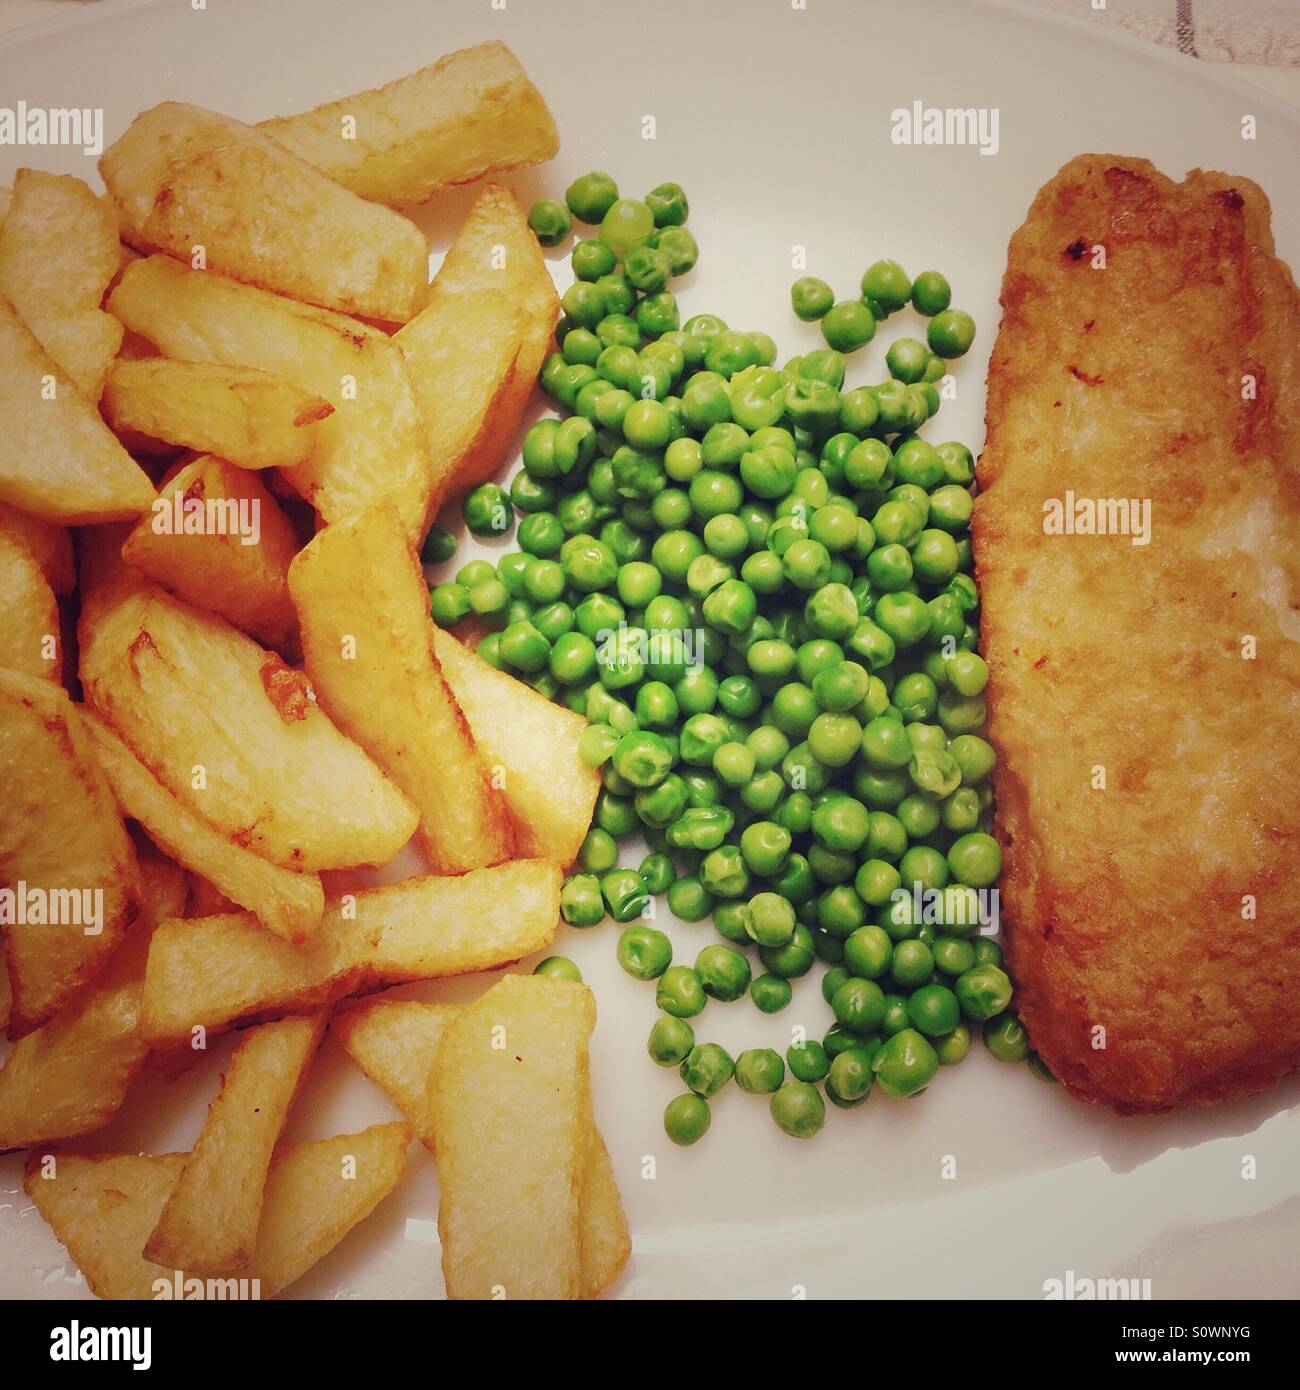 Chips, peas and fish. Stock Photo